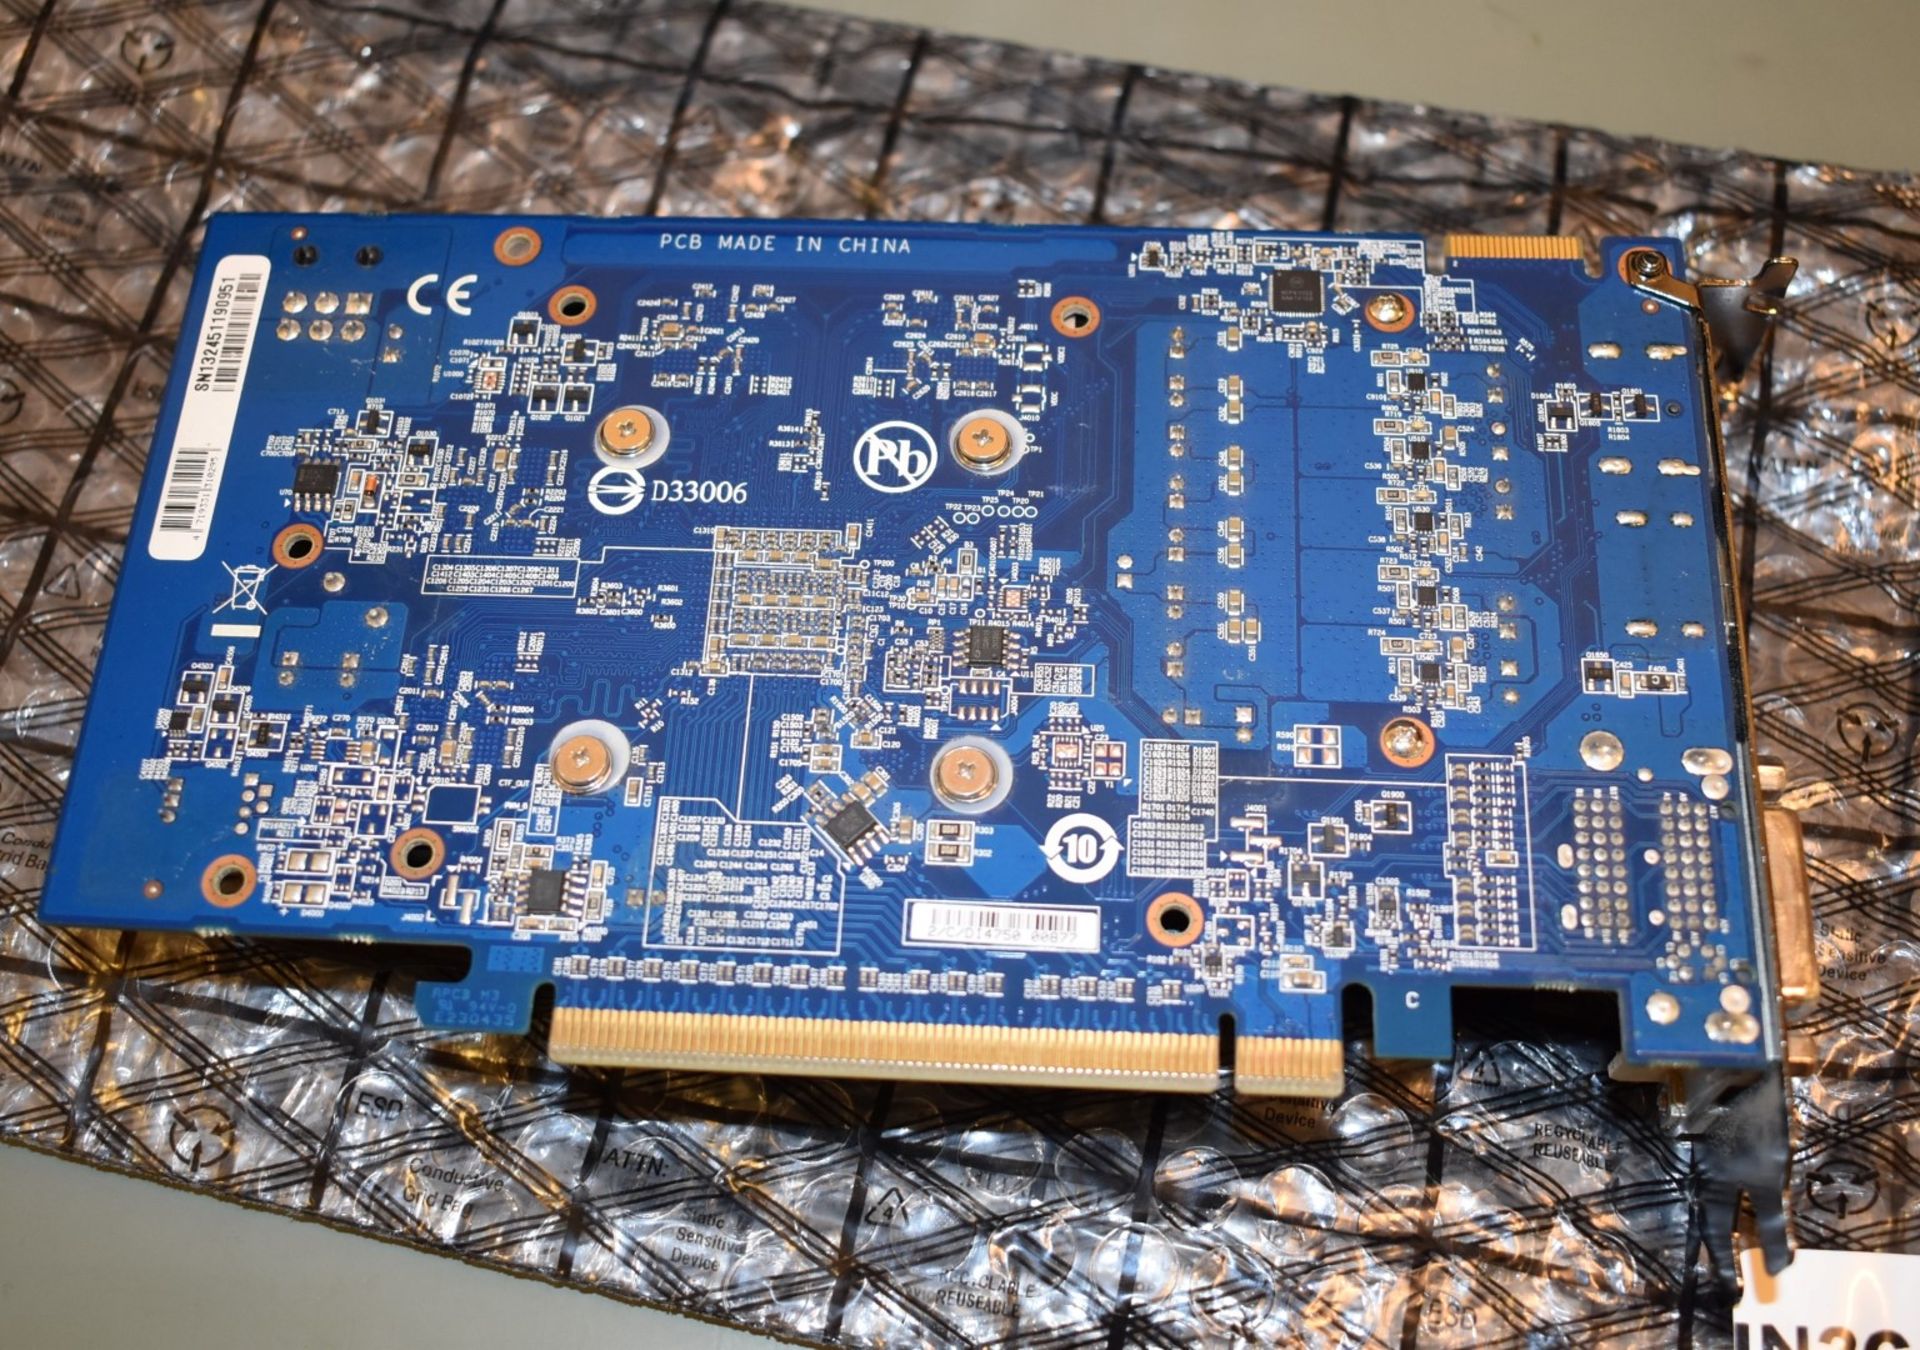 1 x Gigabyte Radeon HD7790 1GB Graphics Card - Previously Used For Testing Purposes - Ref: AC547 - Image 5 of 6